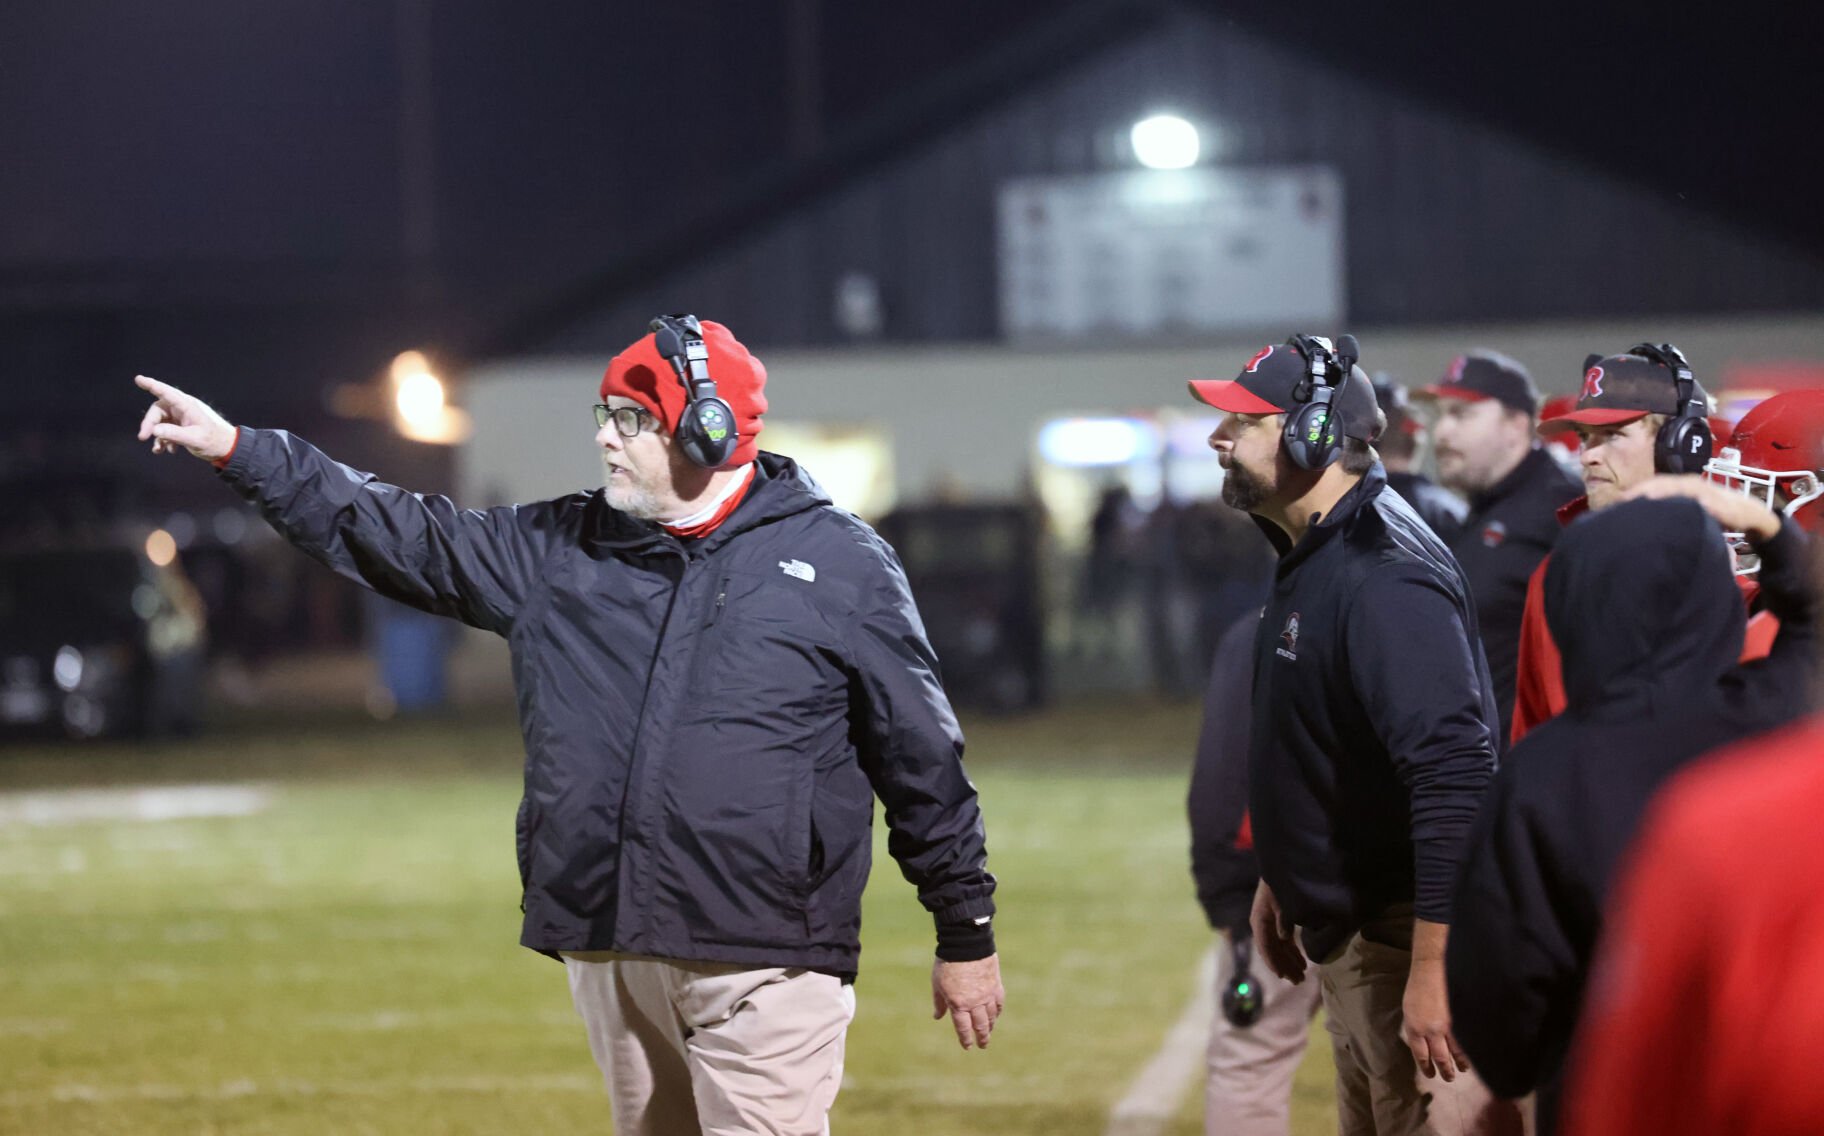 Riverheads’ Amazing 7-Year State Championship Streak: From Winless to Unstoppable